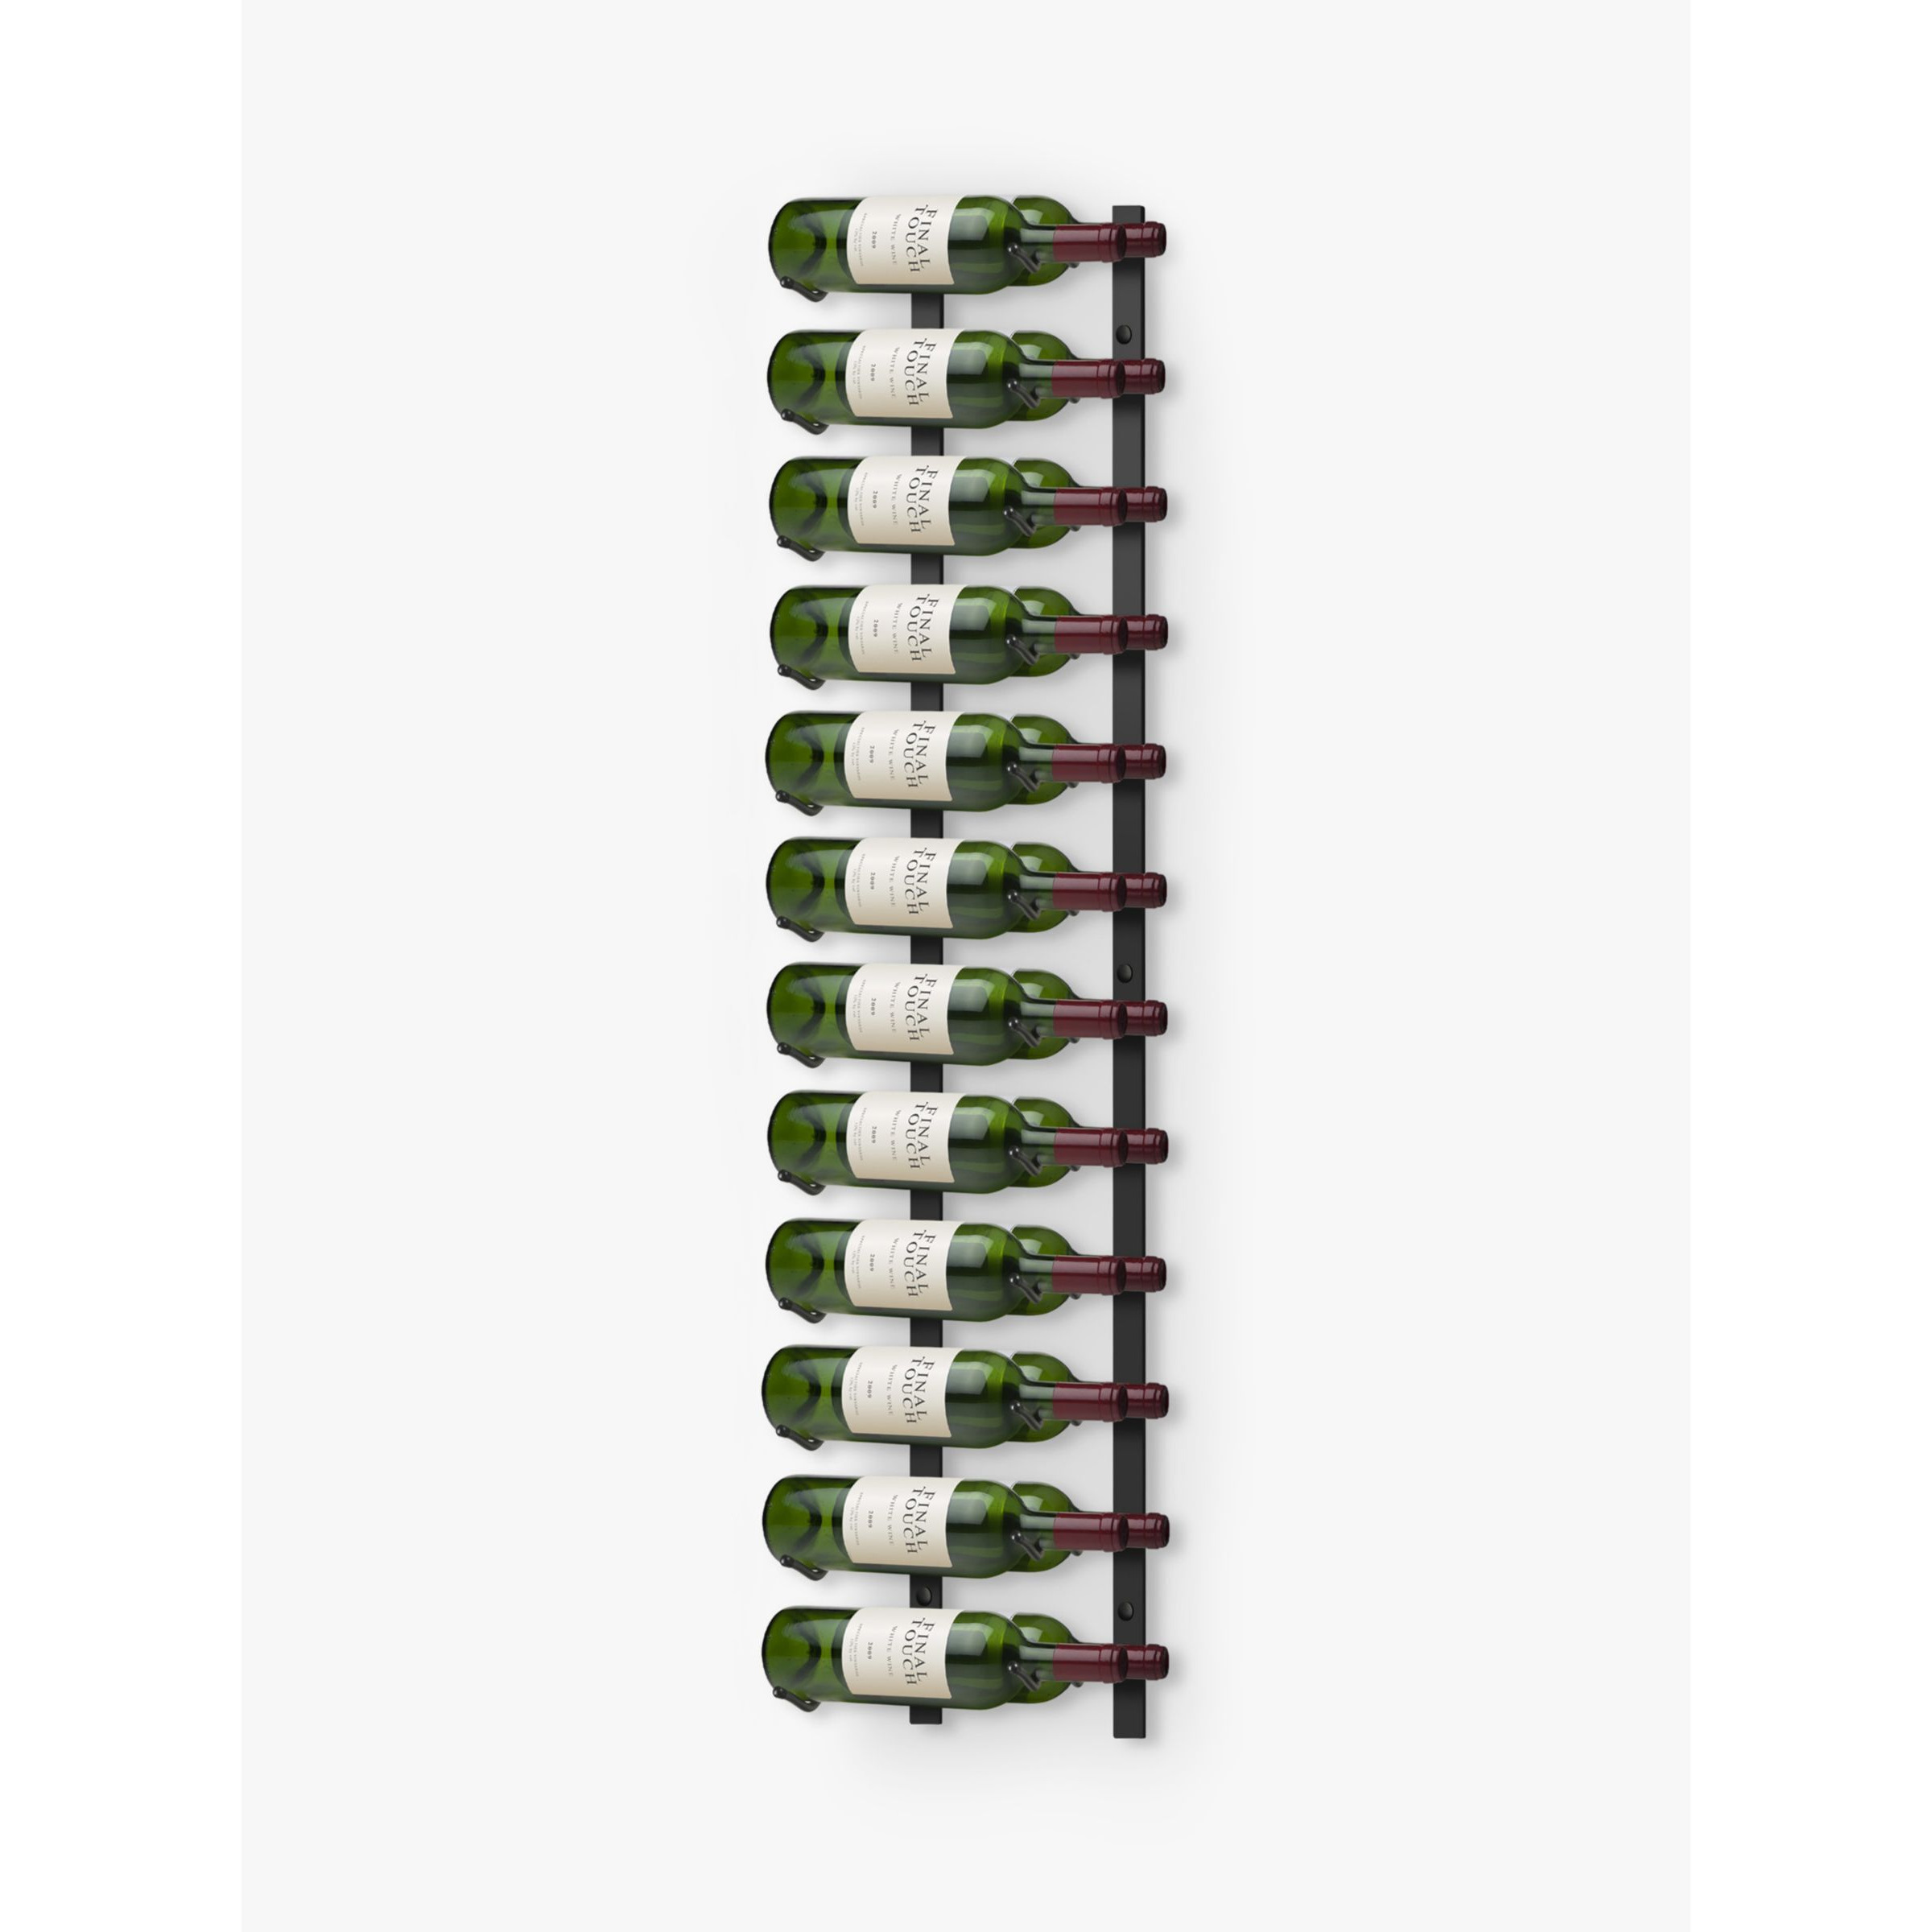 Final Touch Wall-Mounted Metal Wine Rack, 24 Bottle - image 1